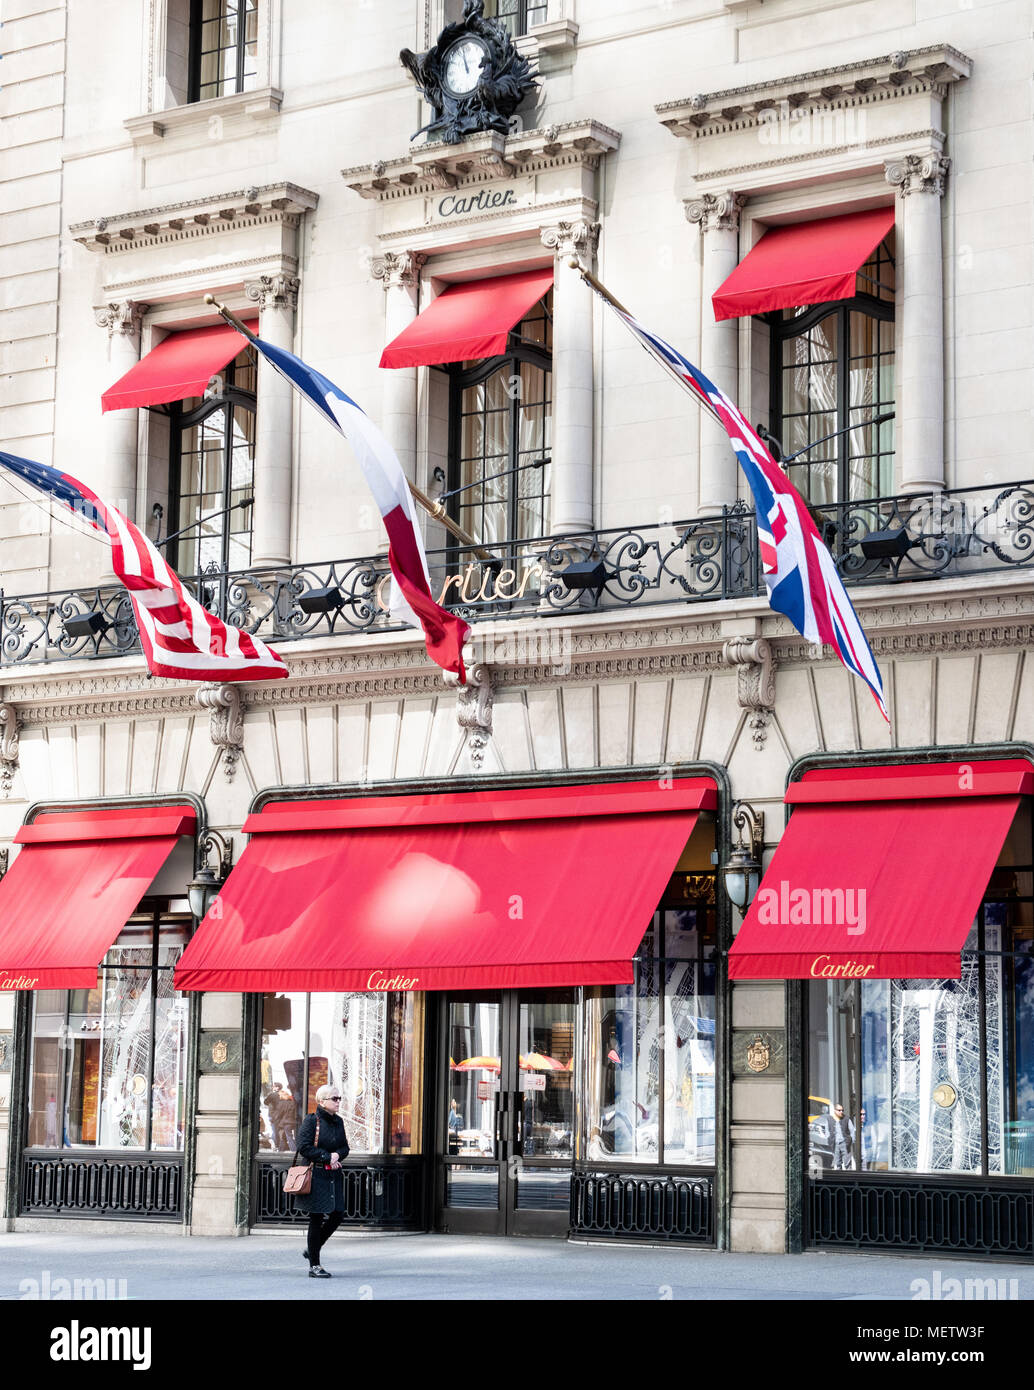 Cartier - 5th Avenue, New York - Jewelry and accessories stores